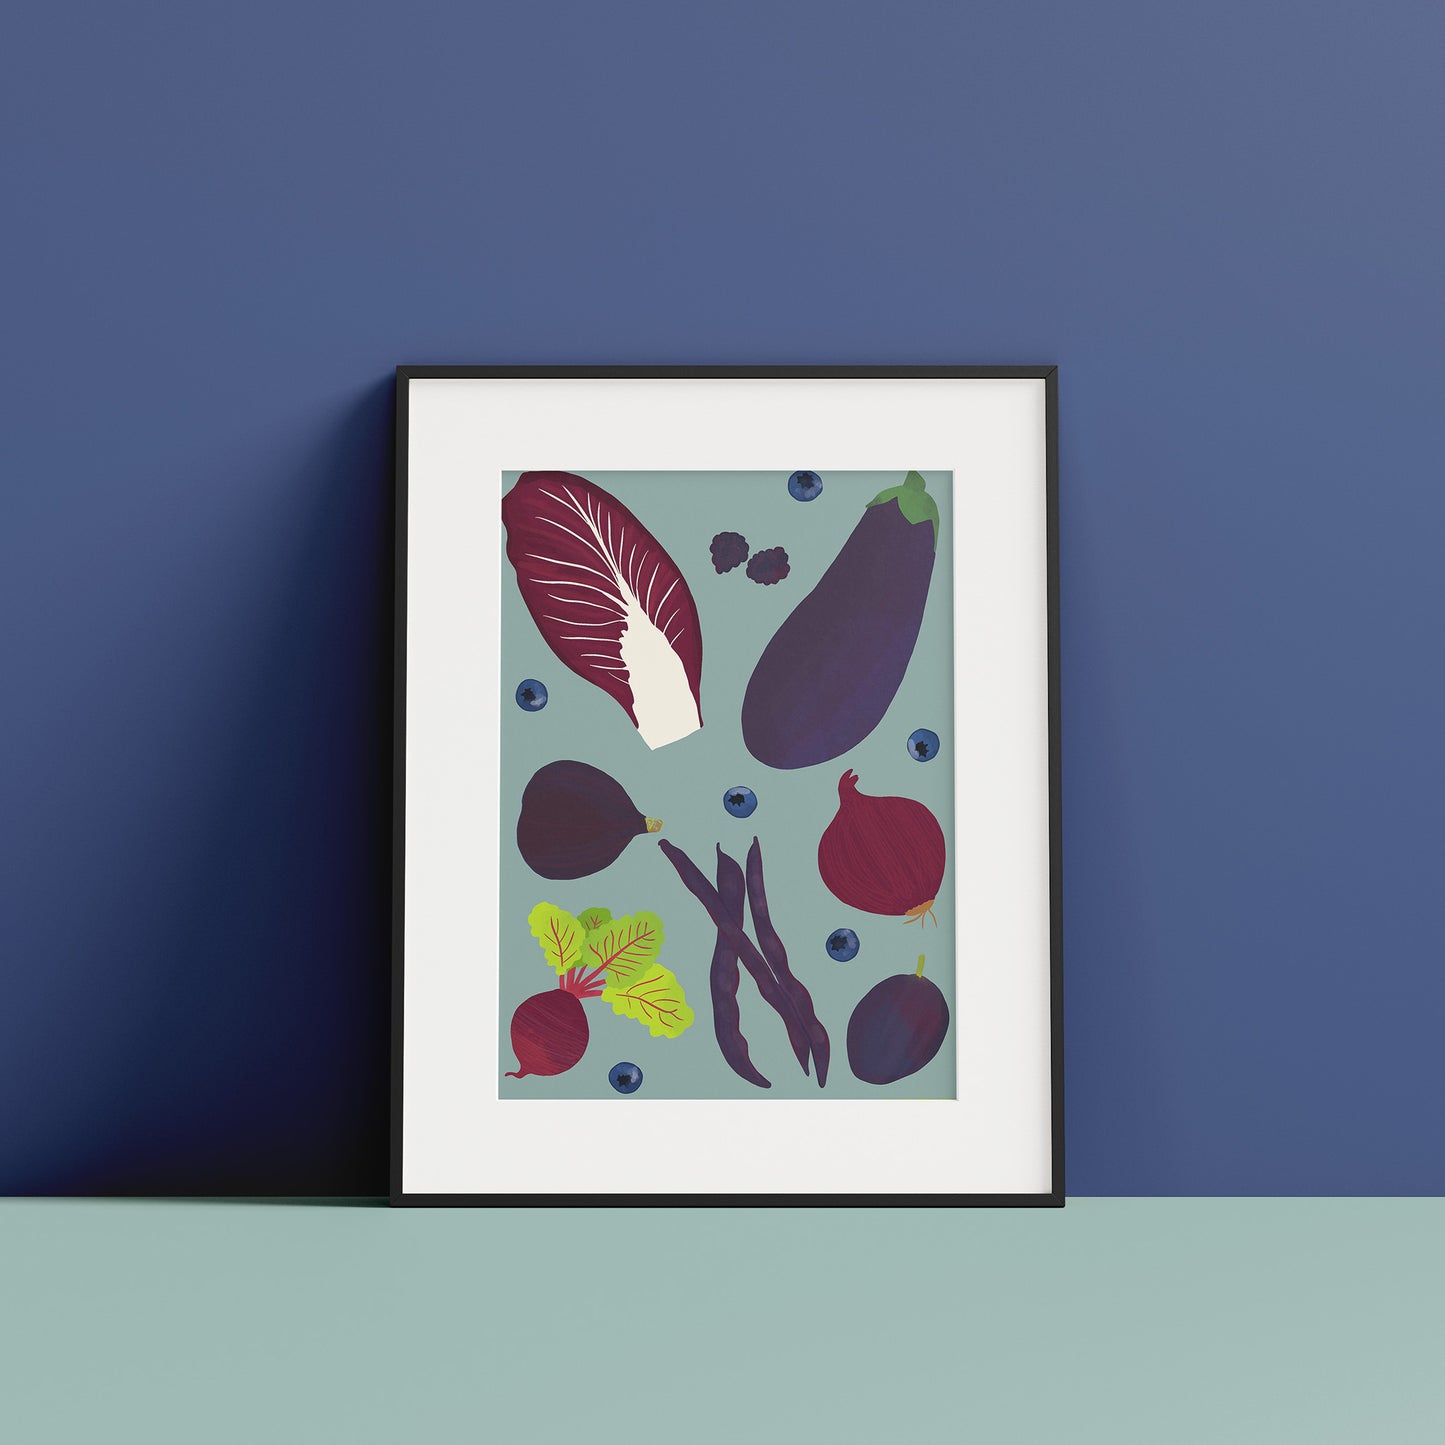 Image of a framed art print of purple fruit and vegetables on a pale indigo background.